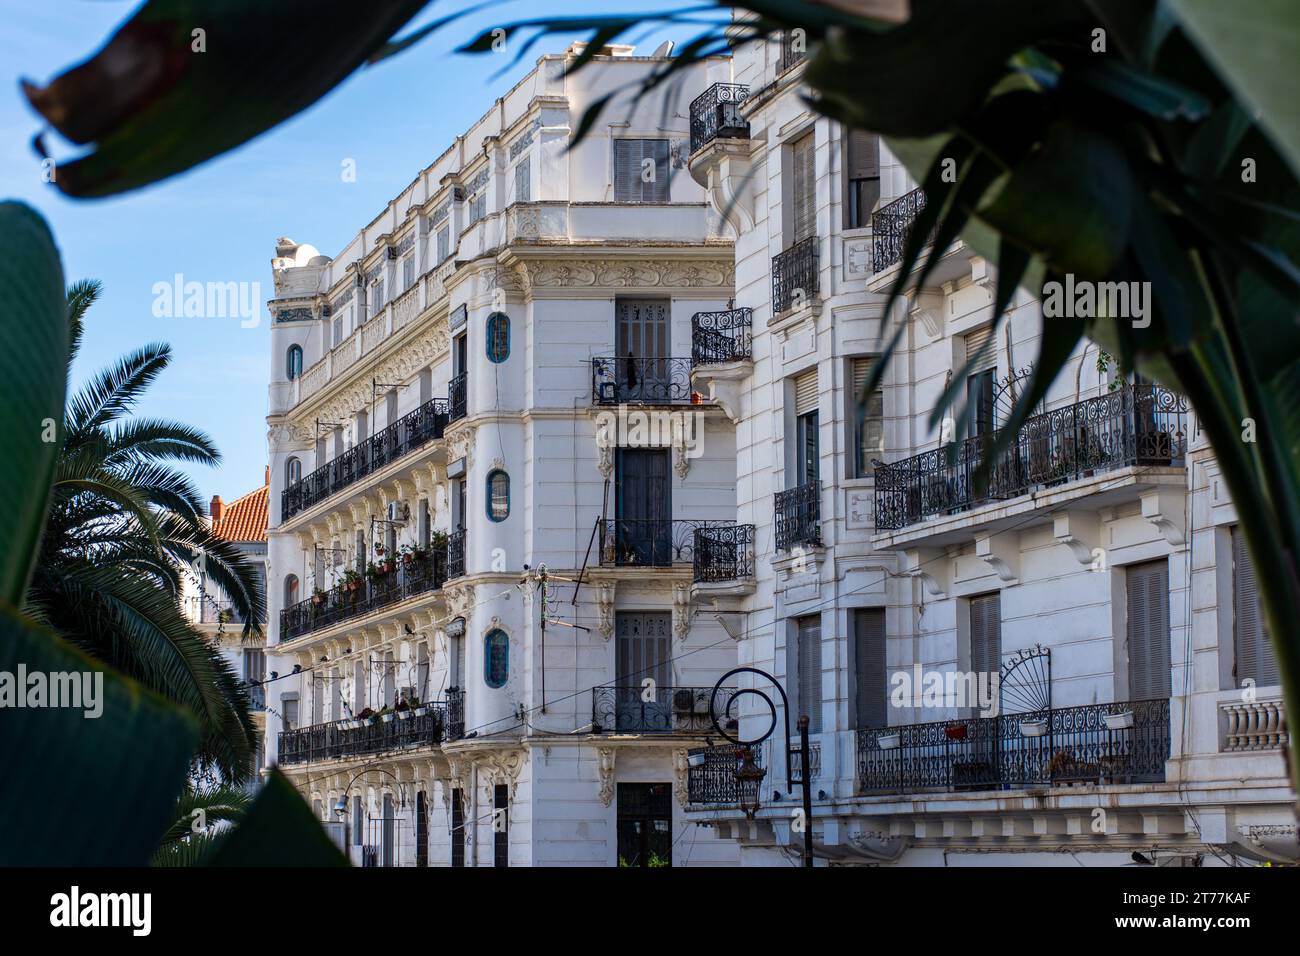 View of a colonial building in Algiers City. Heritage architecture. Stock Photo